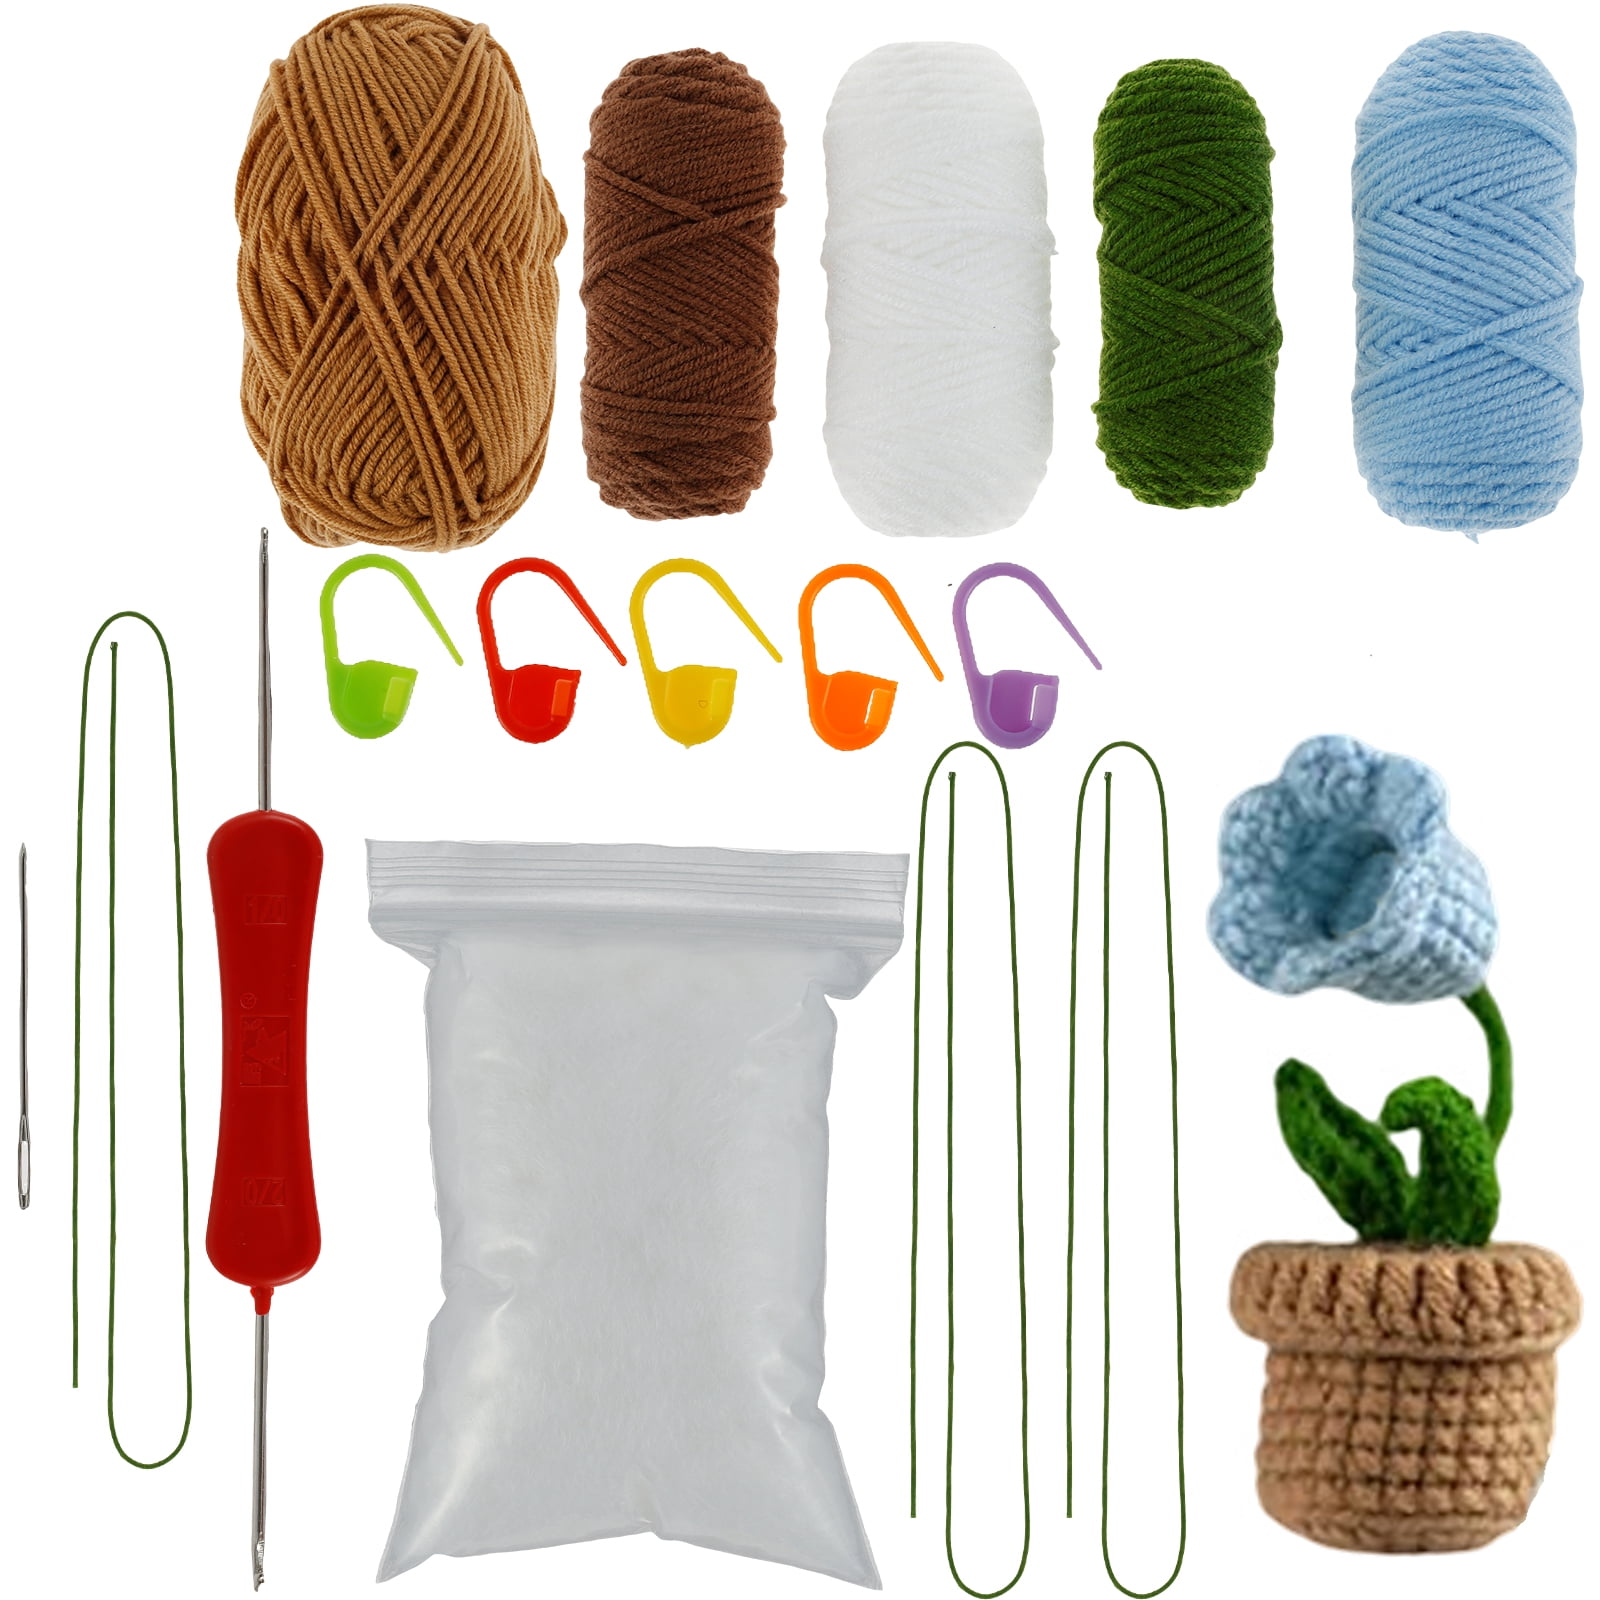  FECLOUD Crochet Knitting Kit for Beginners - Multicolored  Potted Tulip for Beginners Adults, Step-by-Step Video Tutorials, Learn to  Knit Kits for Adults Beginner